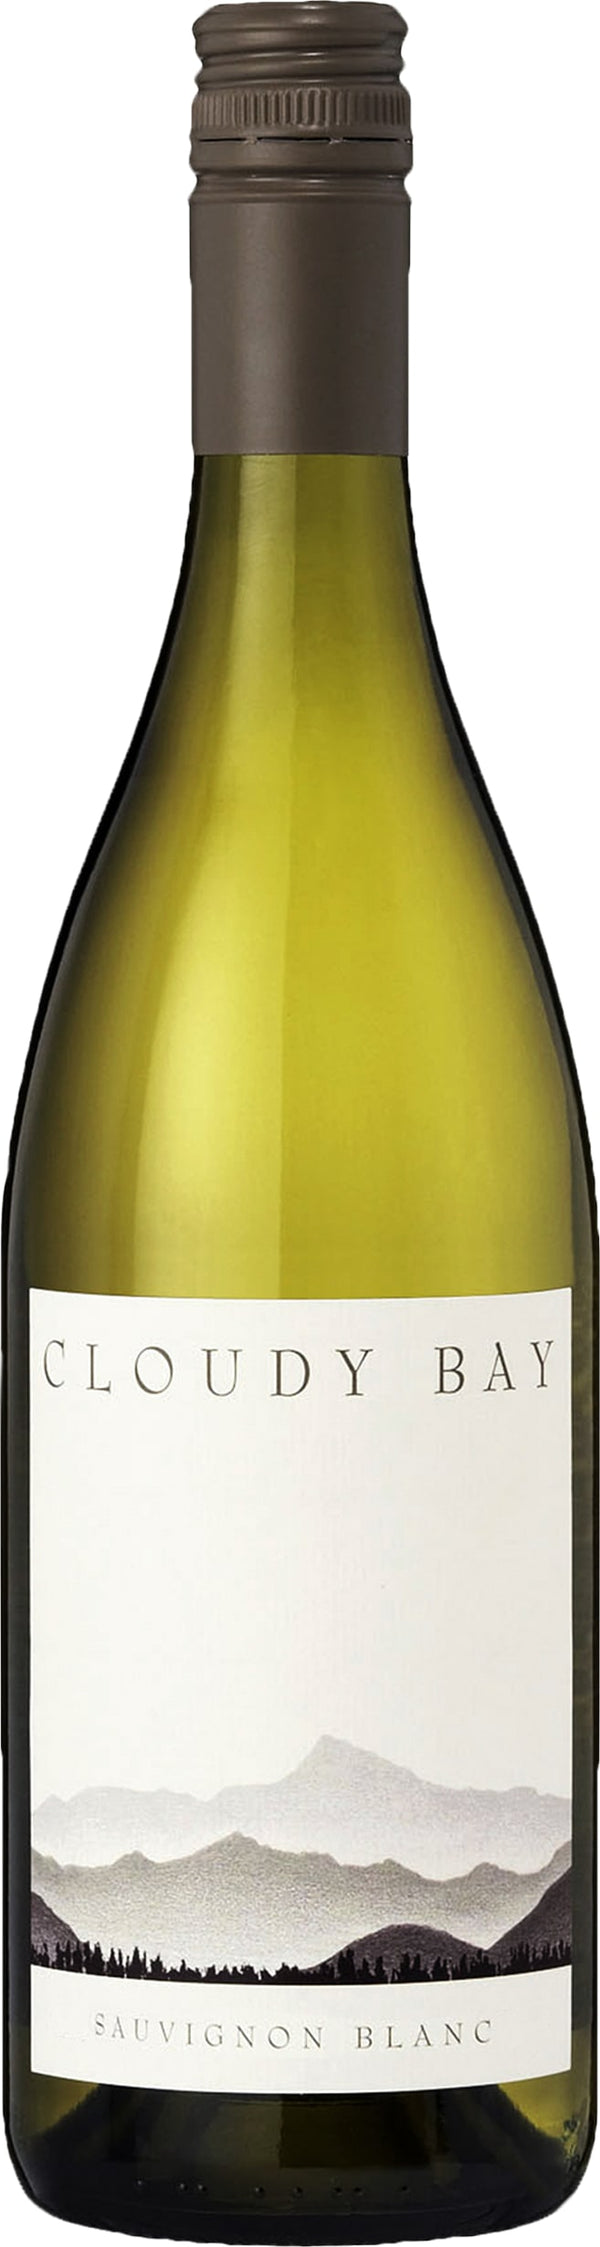 Cloudy Bay Sauvignon Blanc 2022 6x75cl - Just Wines 